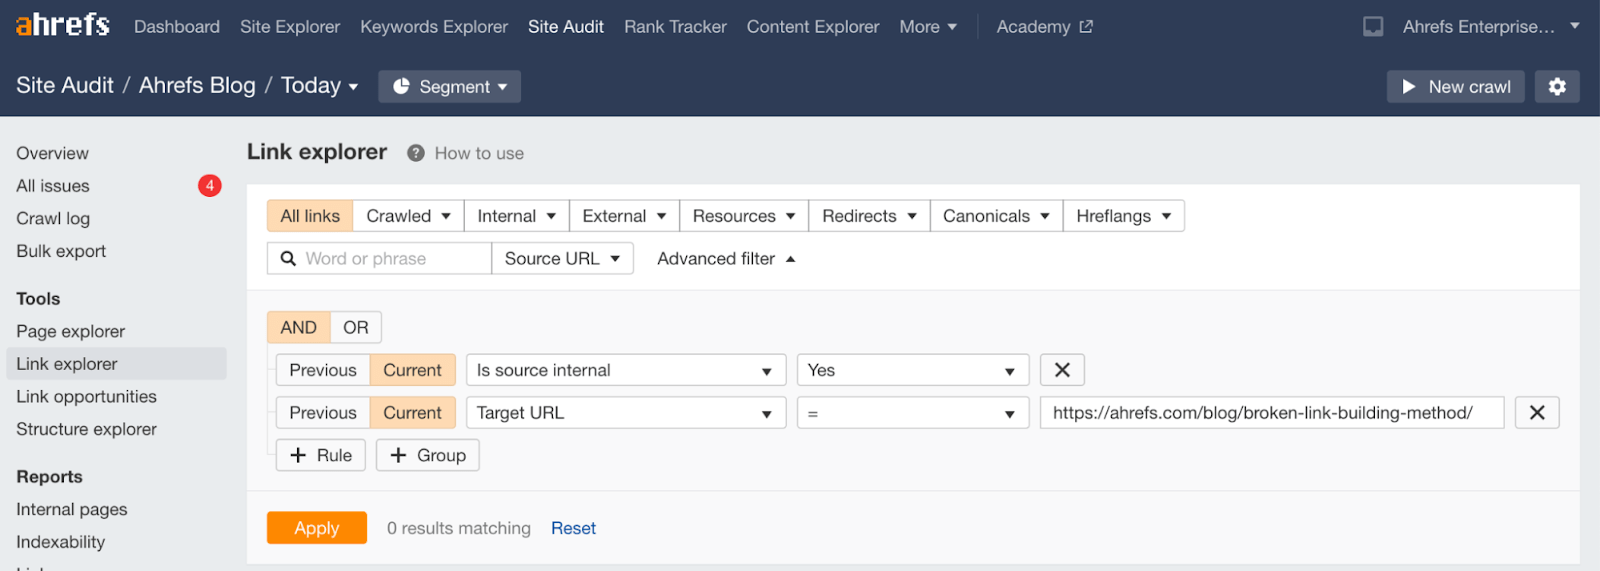 Finding internal link opportunities in Ahrefs' Site Audit